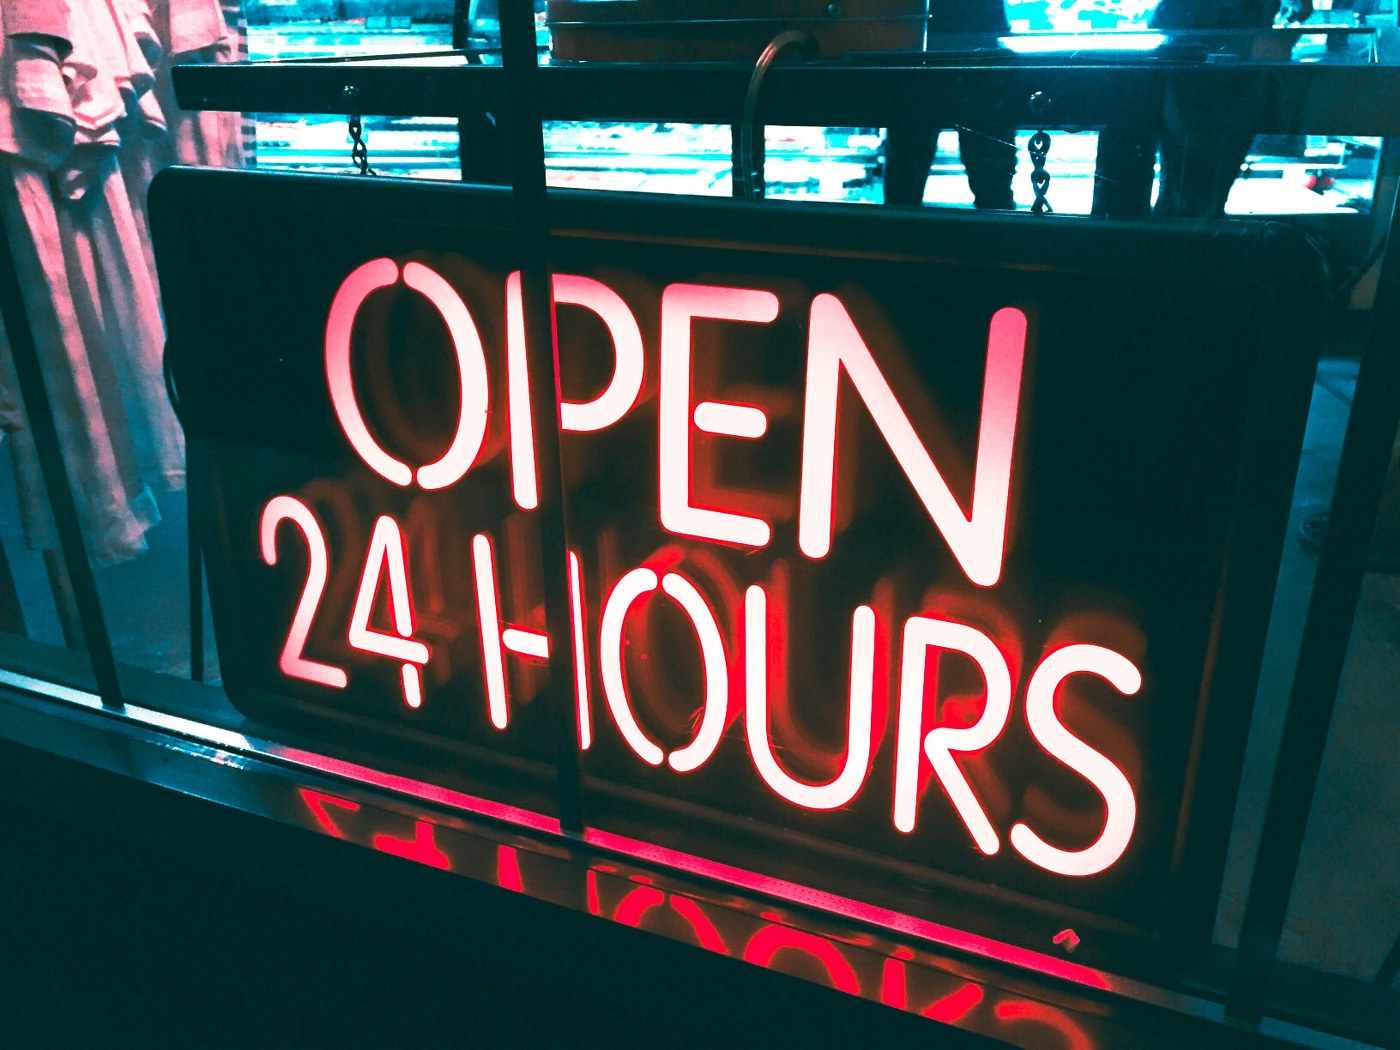 image of a open sign symbolizing 24/7 customer support